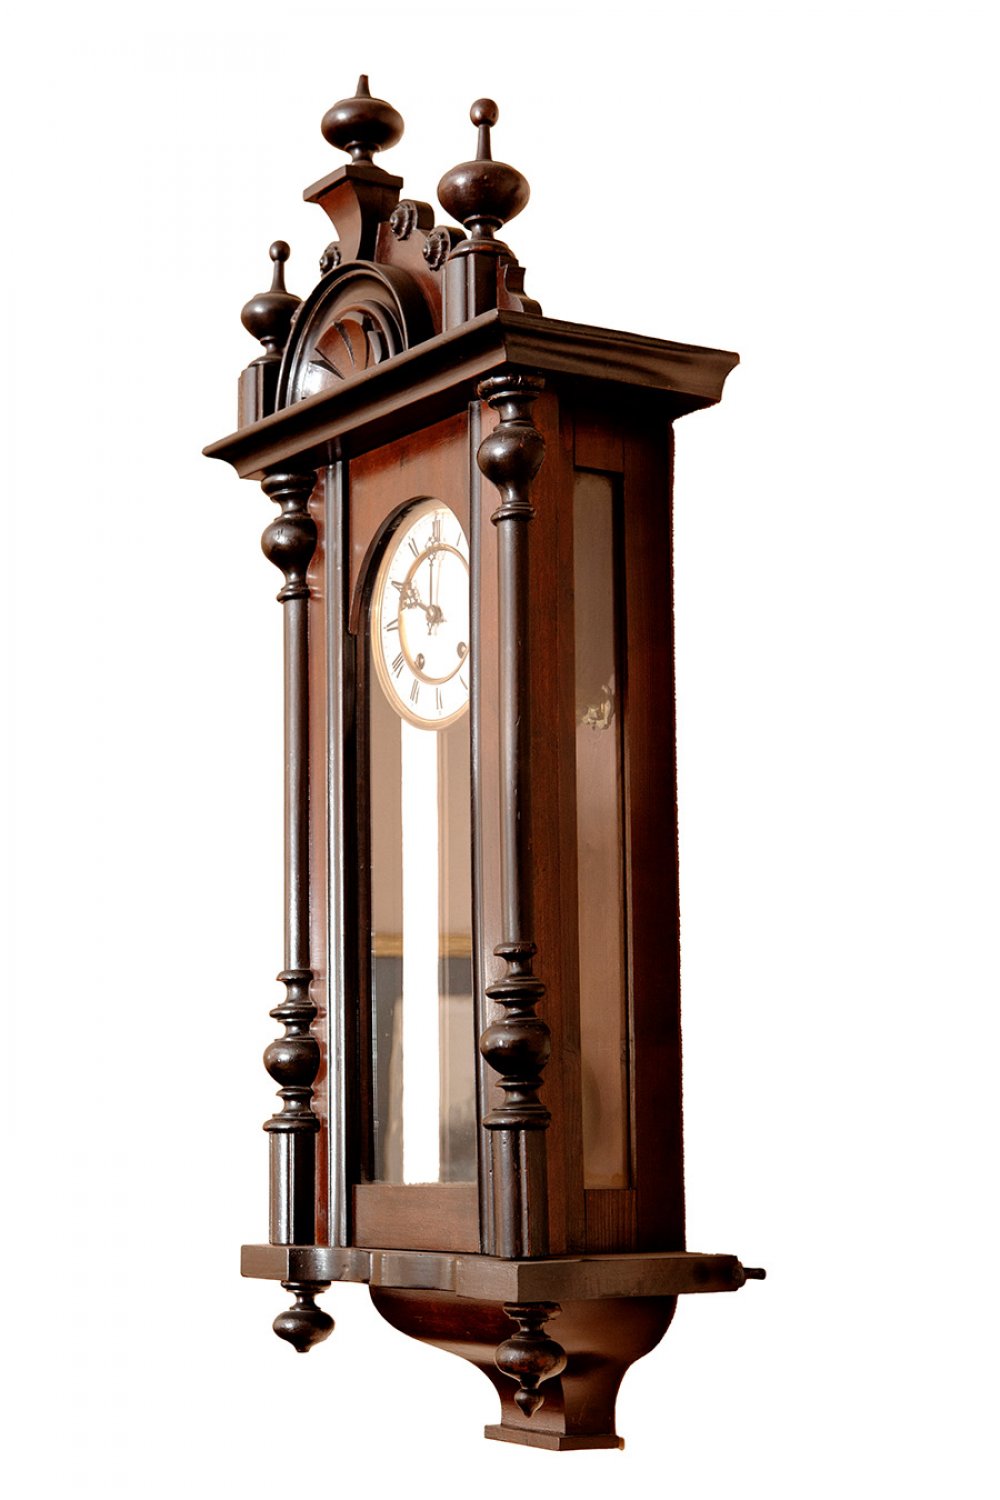 Early 20th century wall clock.Wood.Measurements: 86 x 32 x 17 cm.Wall clock made of wood. The - Image 4 of 5